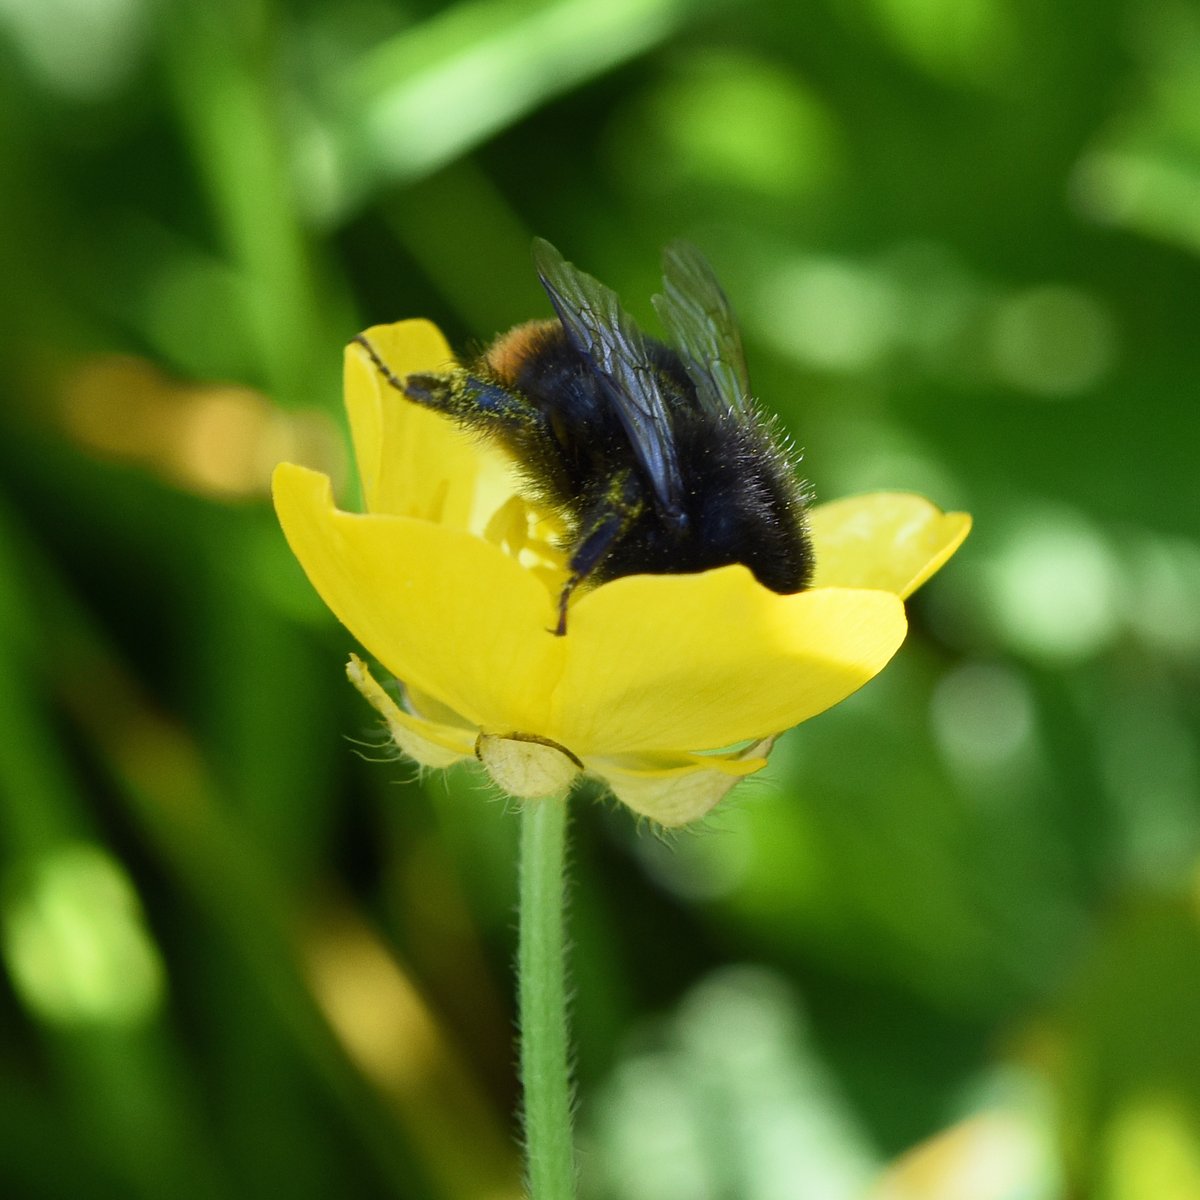 Tiny little Bumble Worker in a Buttercup. The Bee Sanctuary of Ireland.
#bees 
#bumblebees
#buttercup 
#organic 
#wild 
#nature 
#NaturePhotography 
#sanctuary 
#wicklow 
#Ireland 
 #NoMow